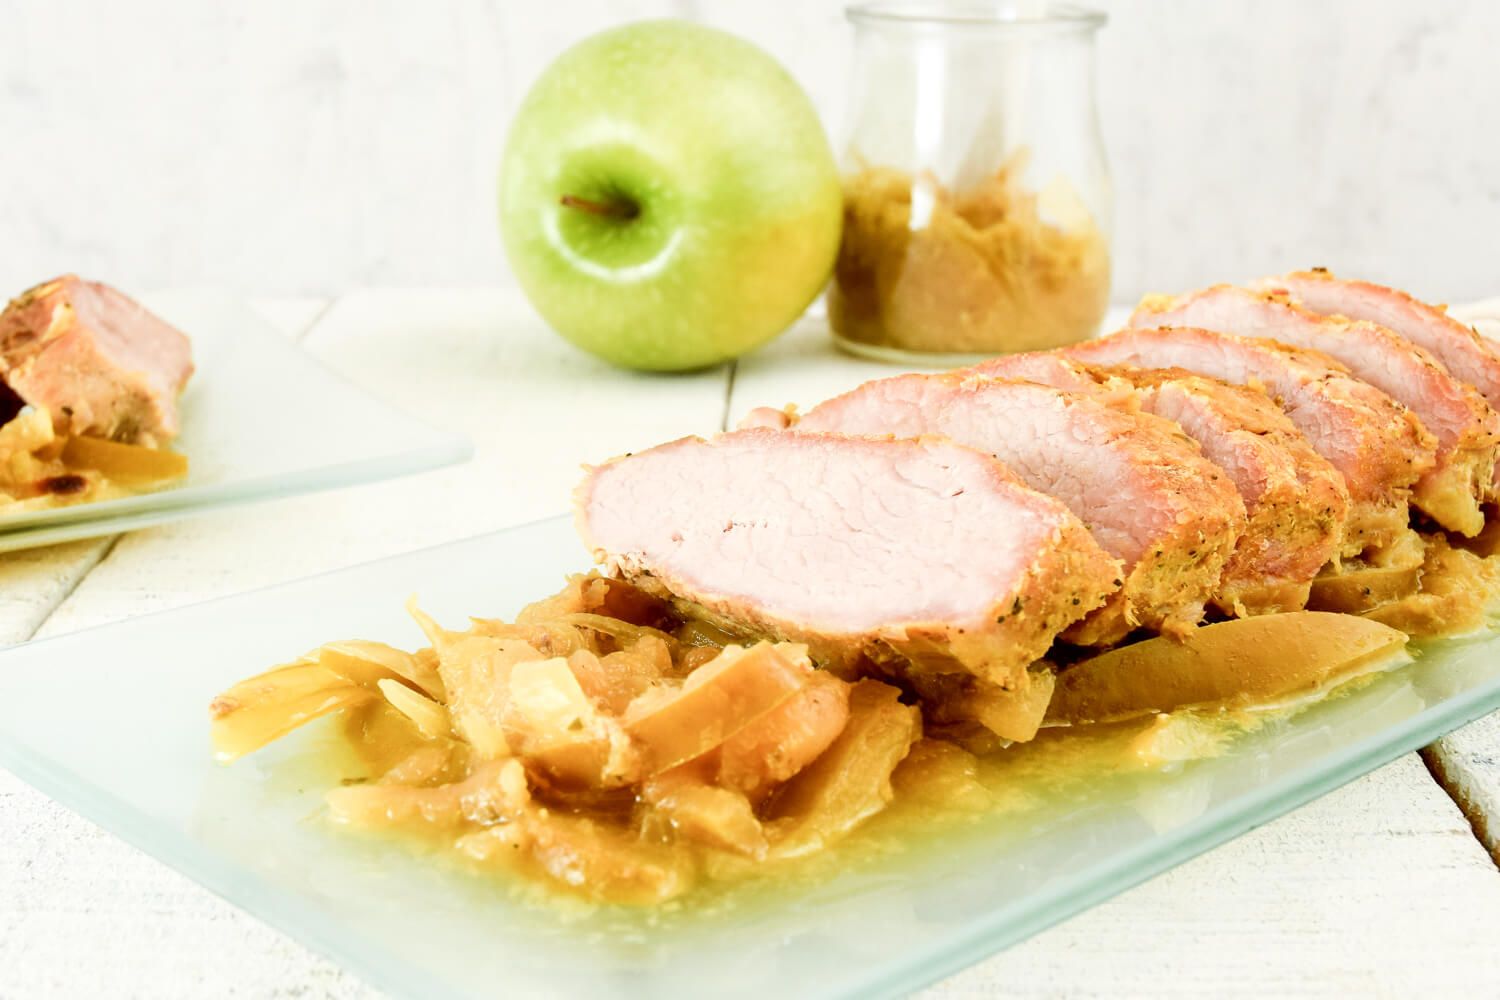 Slow cooker pork and apples on a glass plate with cooked apples and onions.